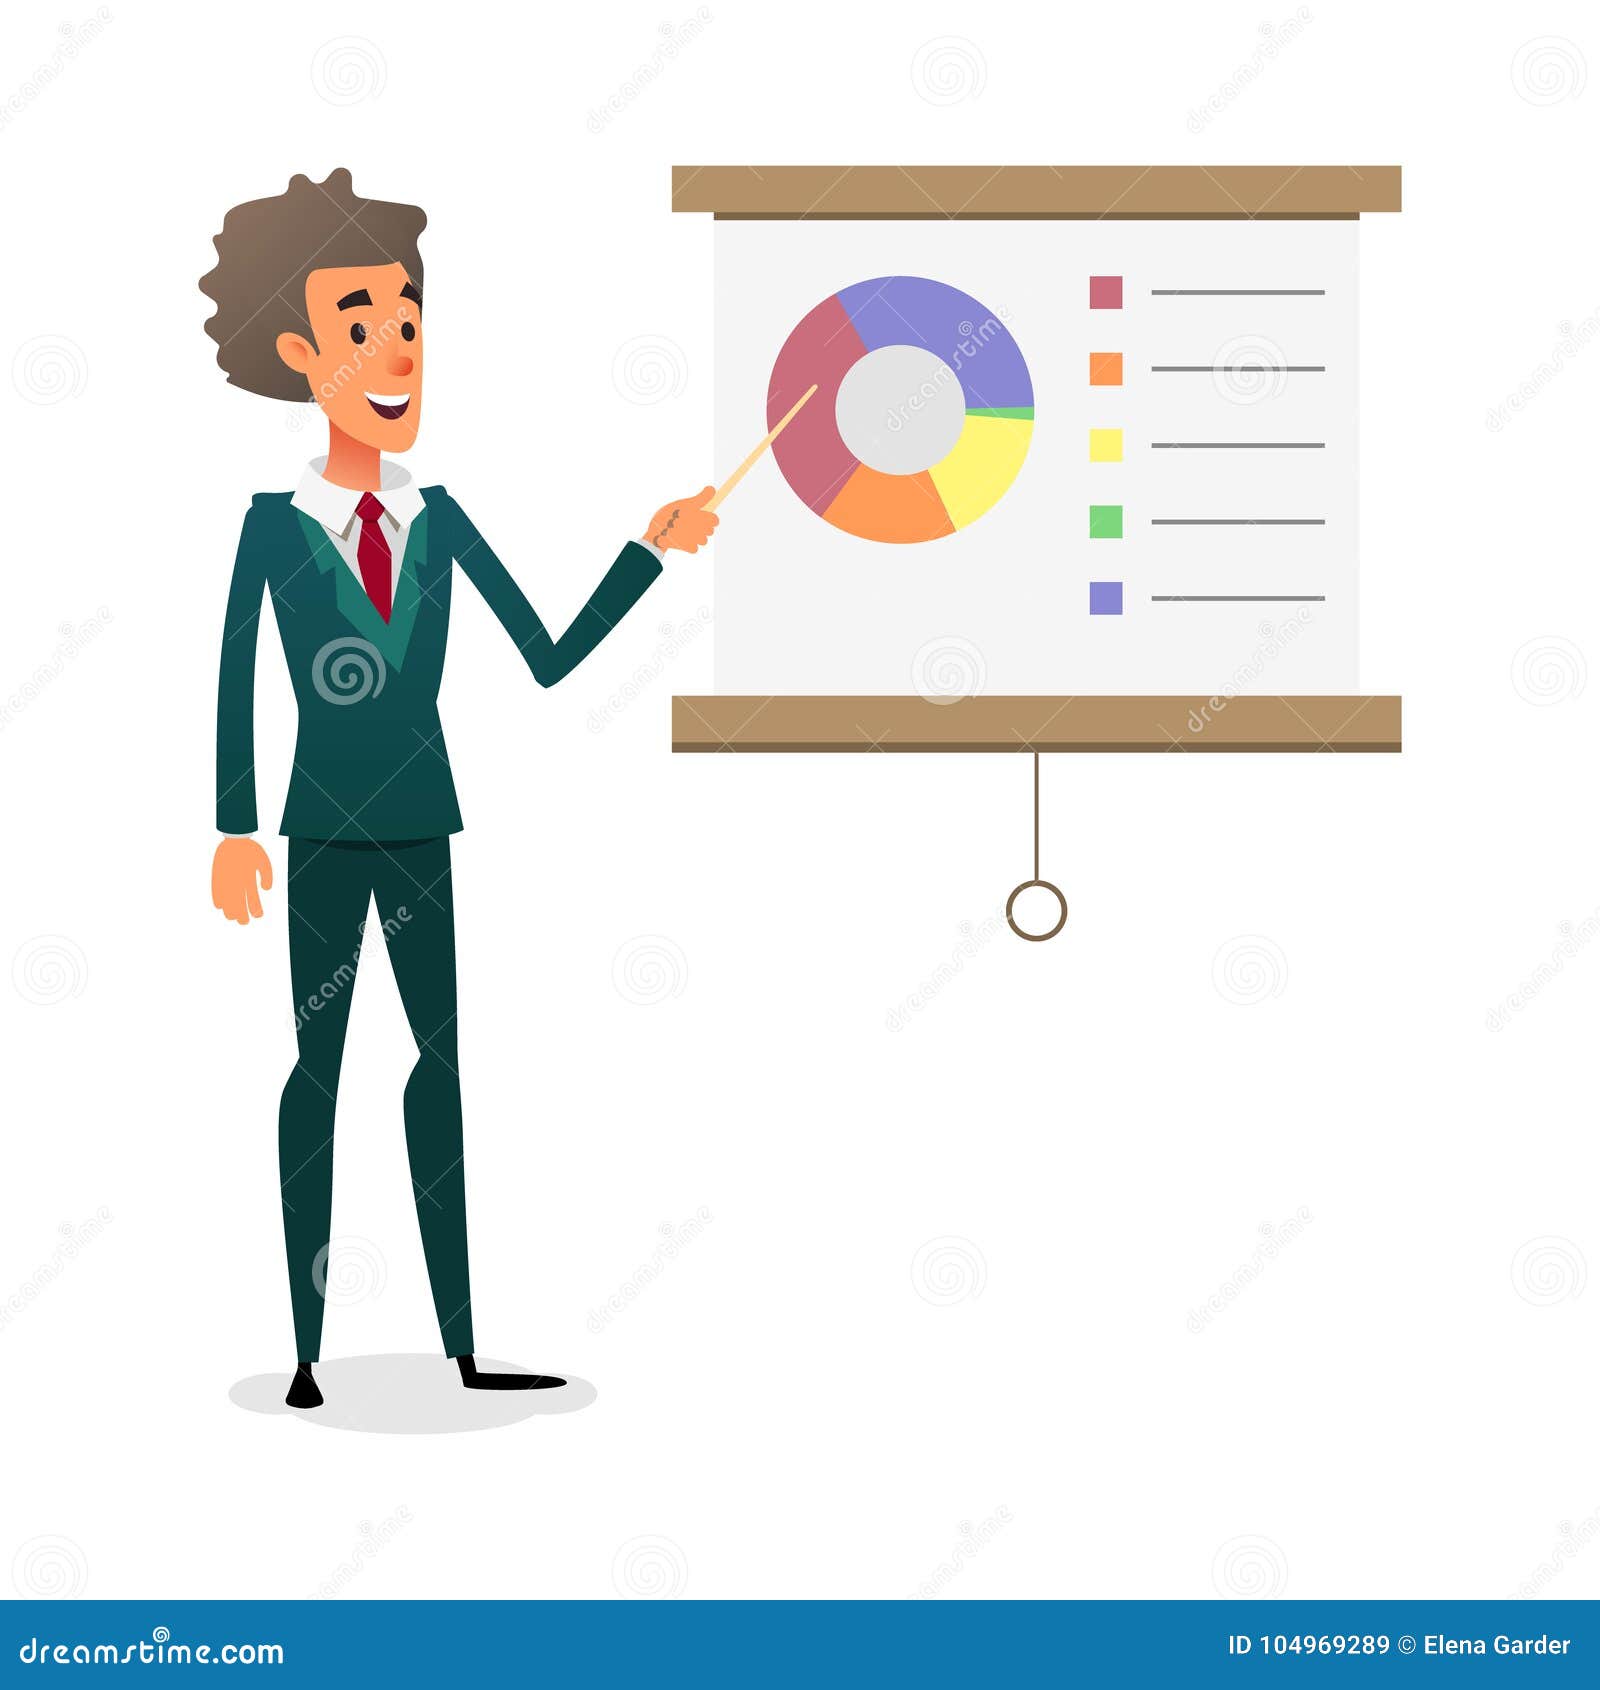 funny cartoon manager presenting whiteboard about financial growth. young businessman making presentation and showing